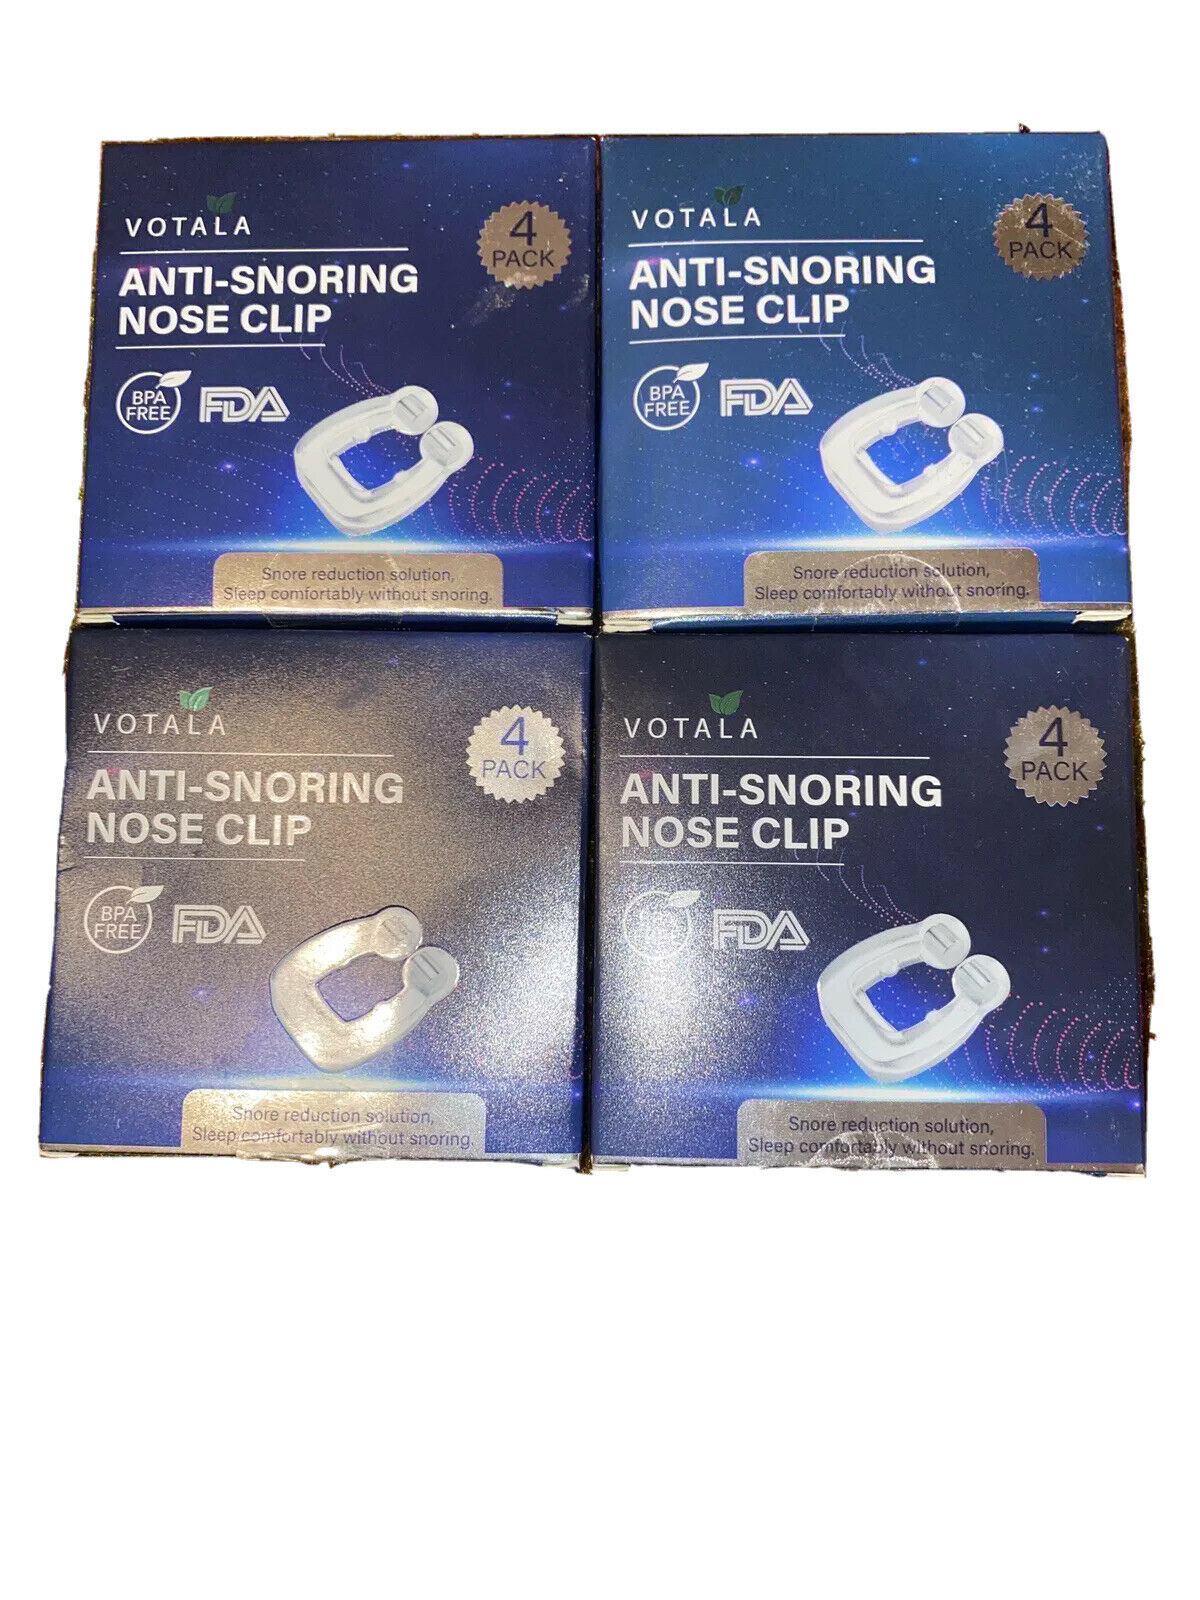 (4) Votala 4-pack Anti-snoring Nose Clips, Bpa-free ••16 Total Nose Clips!••